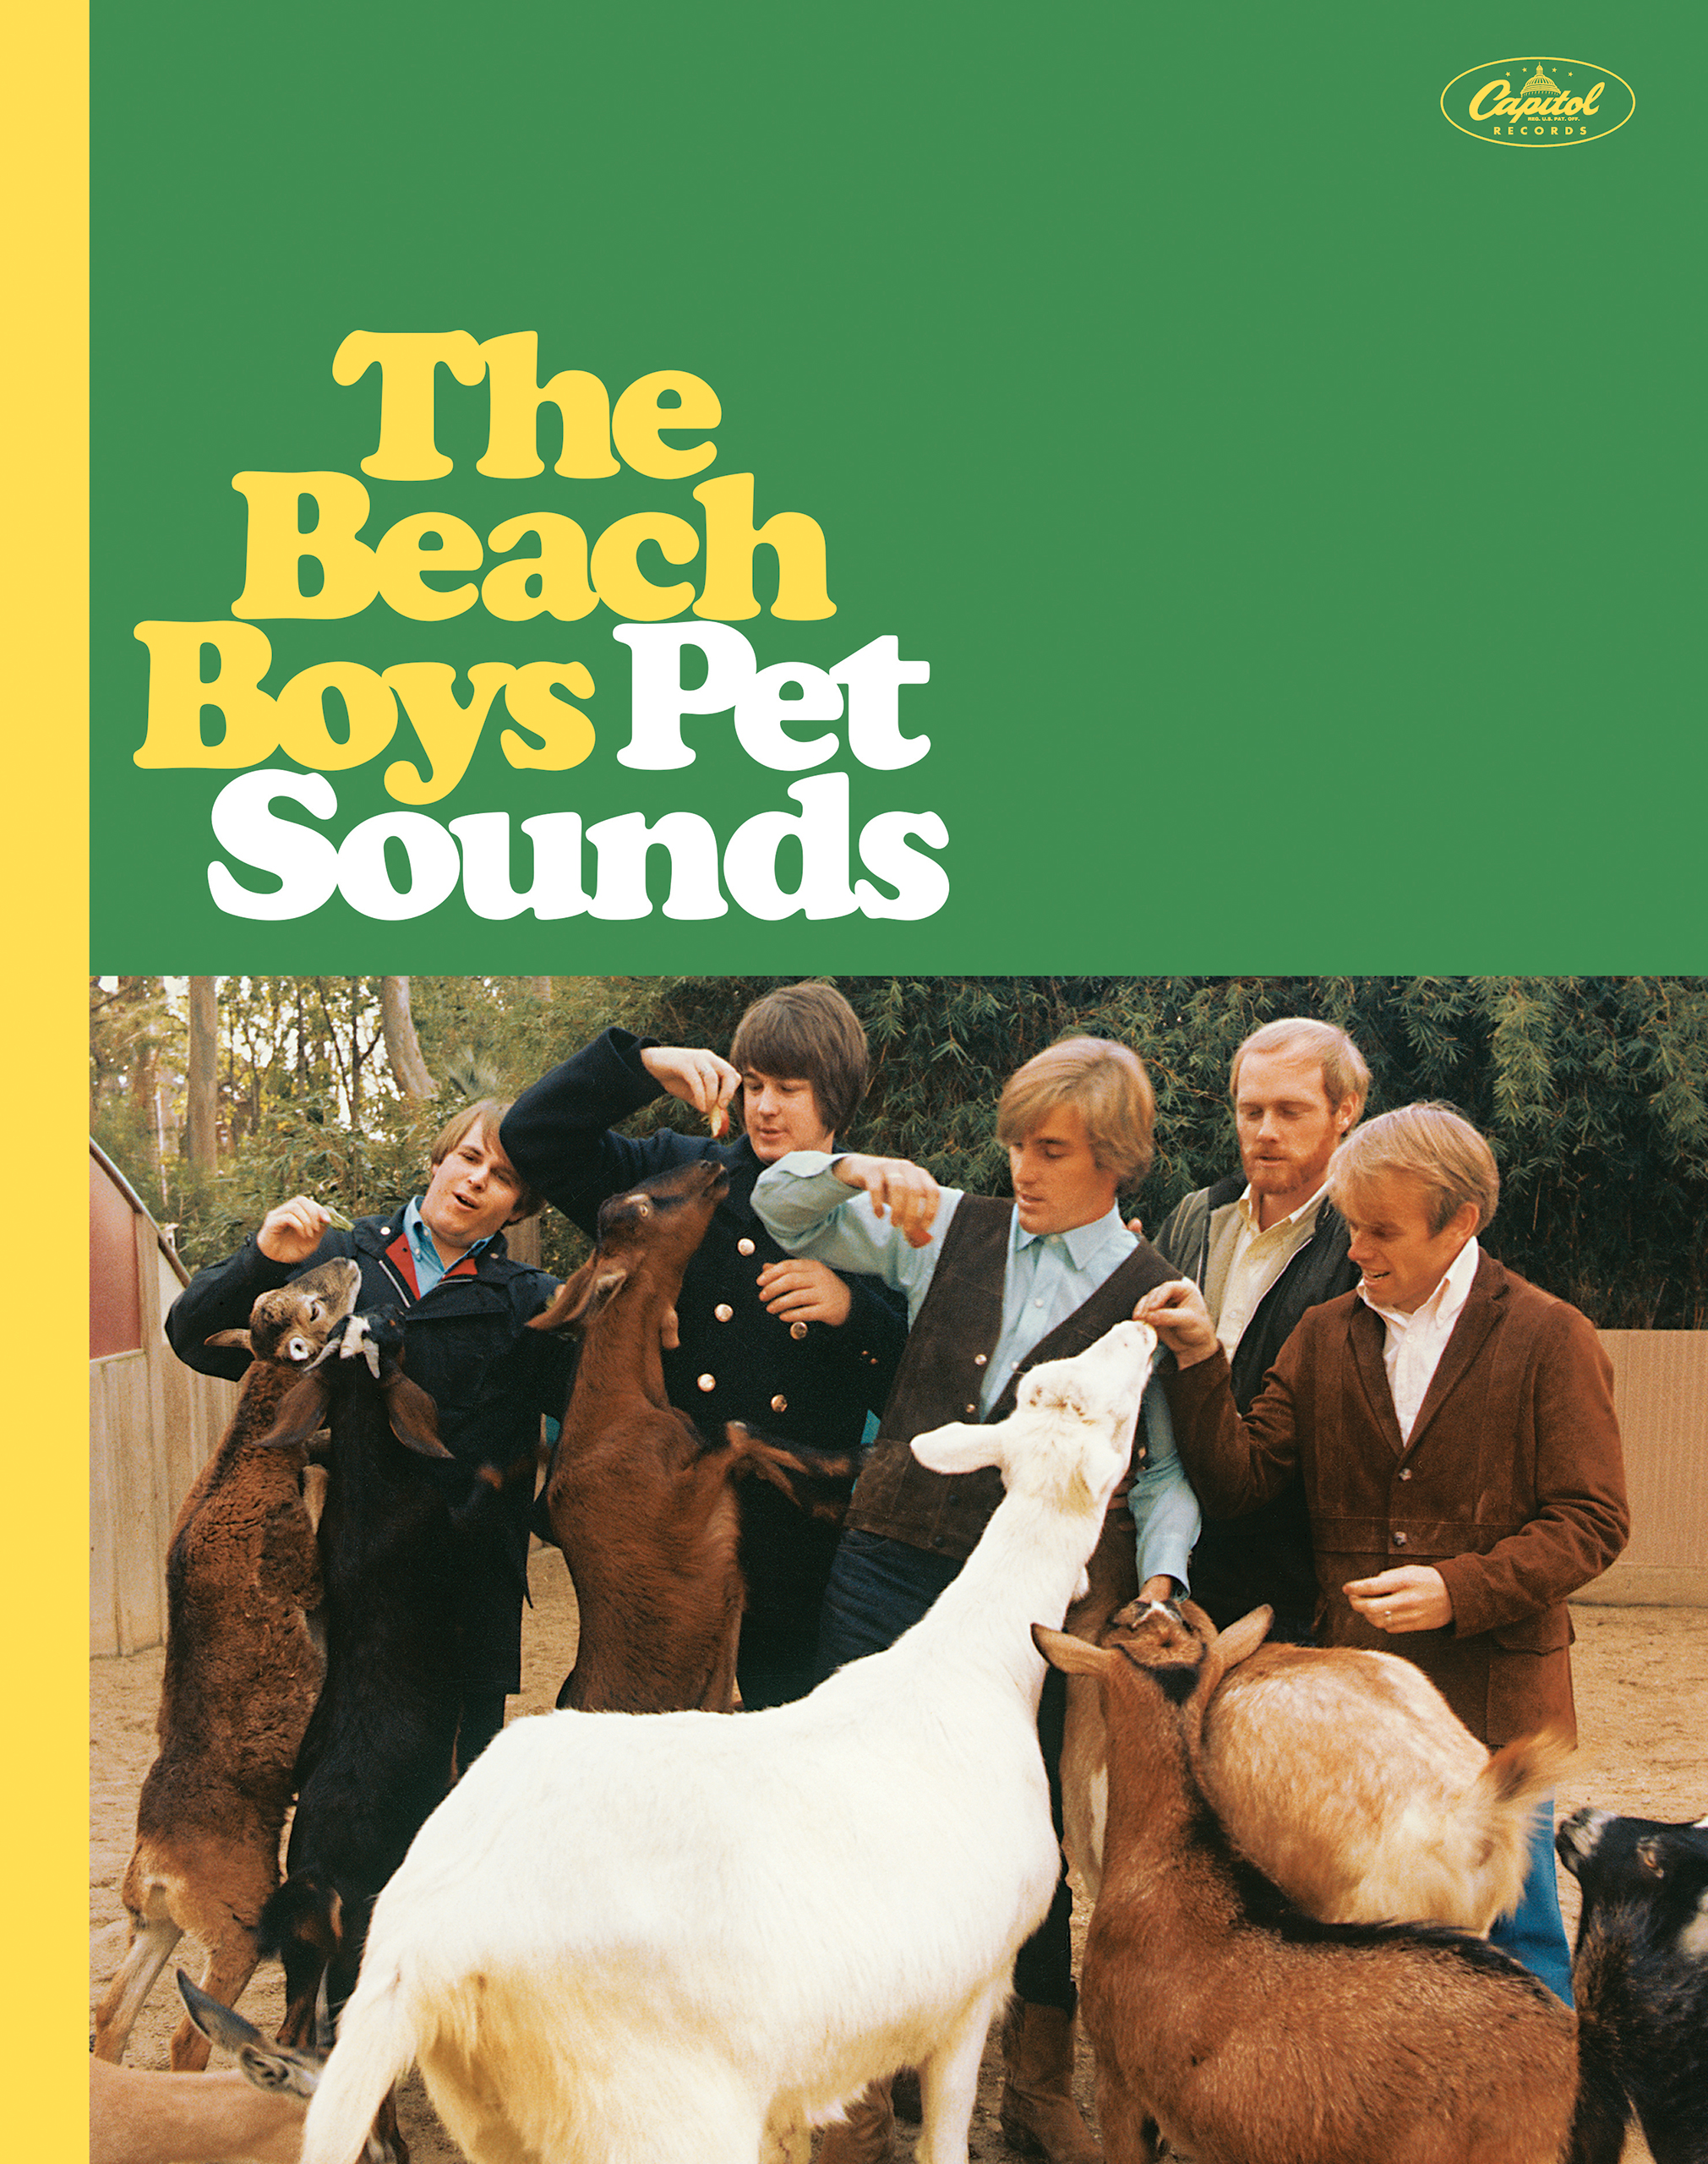 50th Anniversary Collectors Edition cover of Pet Sounds. (Captial/UMe)